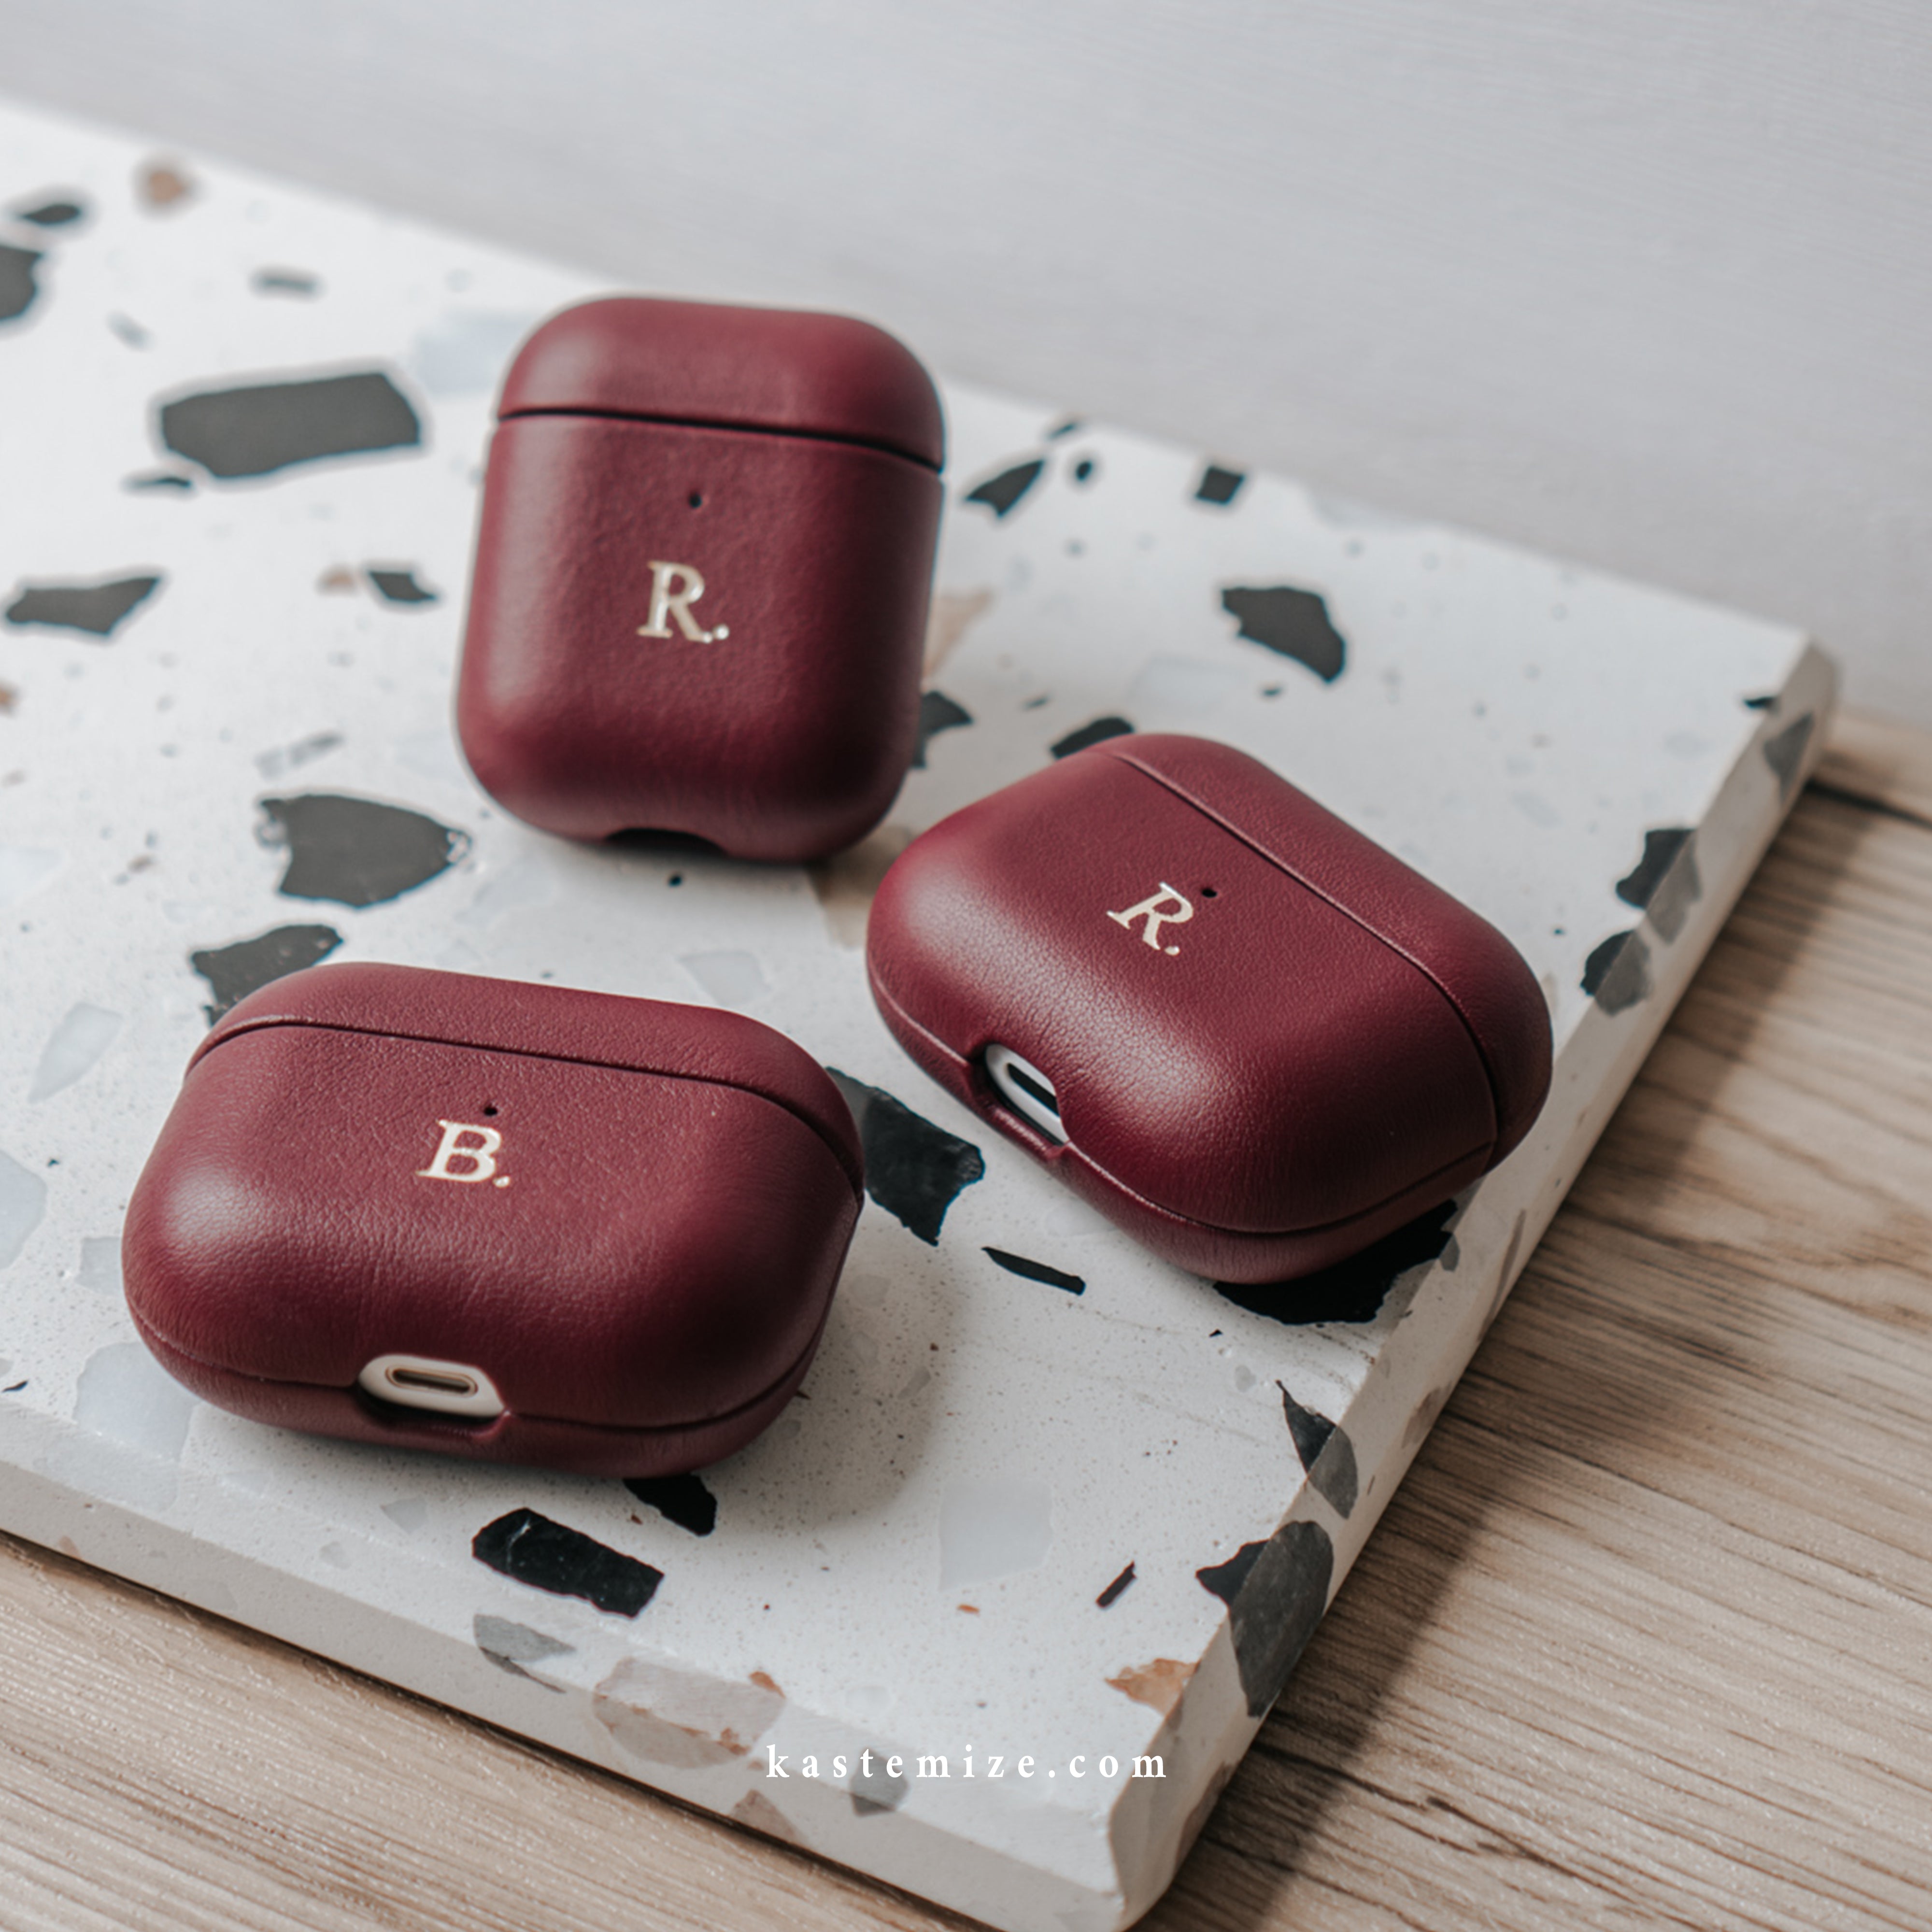 Personalised Burgundy Airpods Case in Singapore with name engraving and customisation